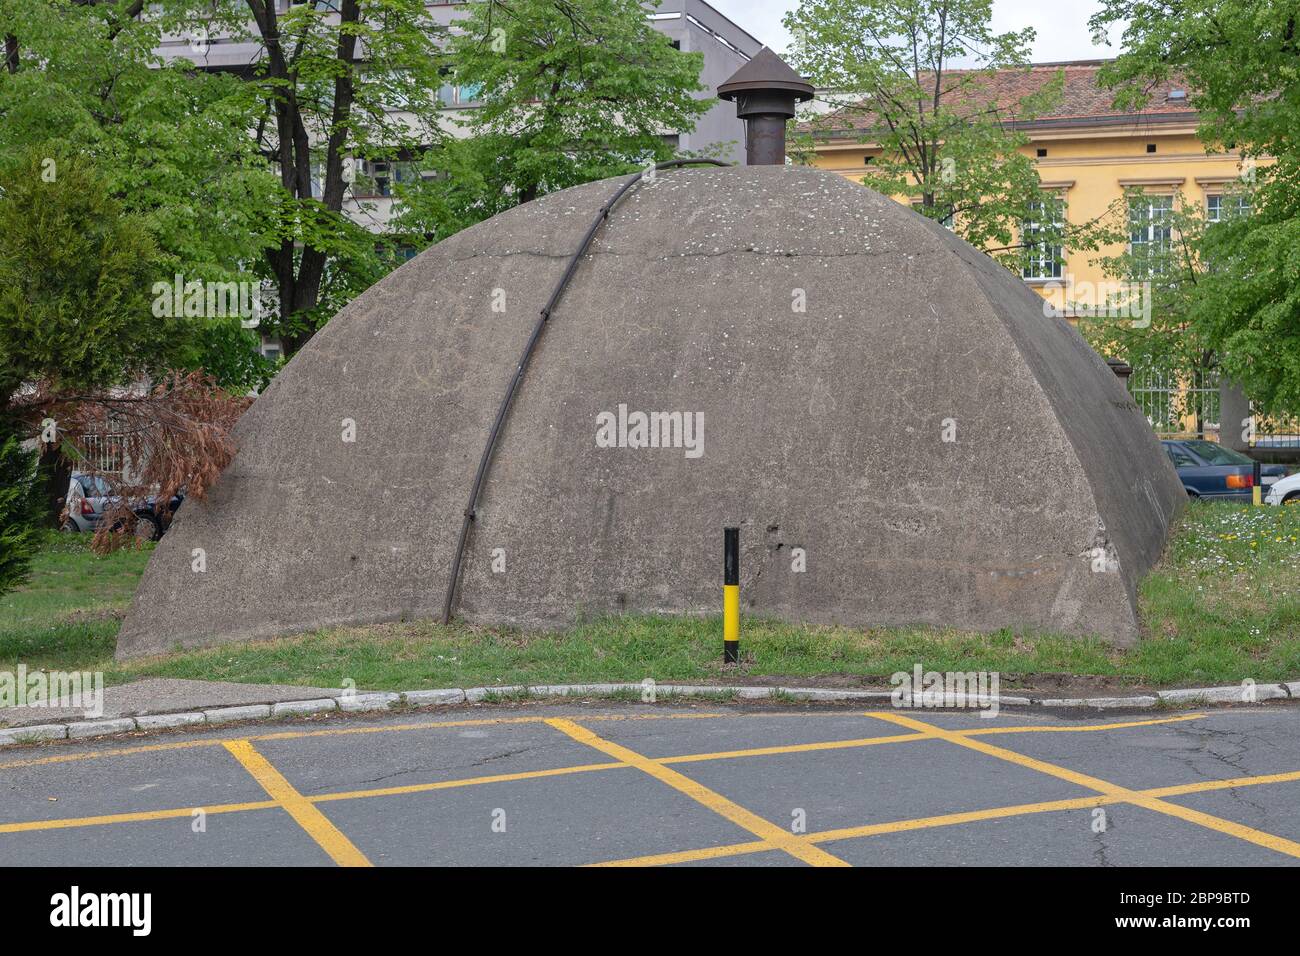 Concrete Survival Shelter From Cold War Era Stock Photo